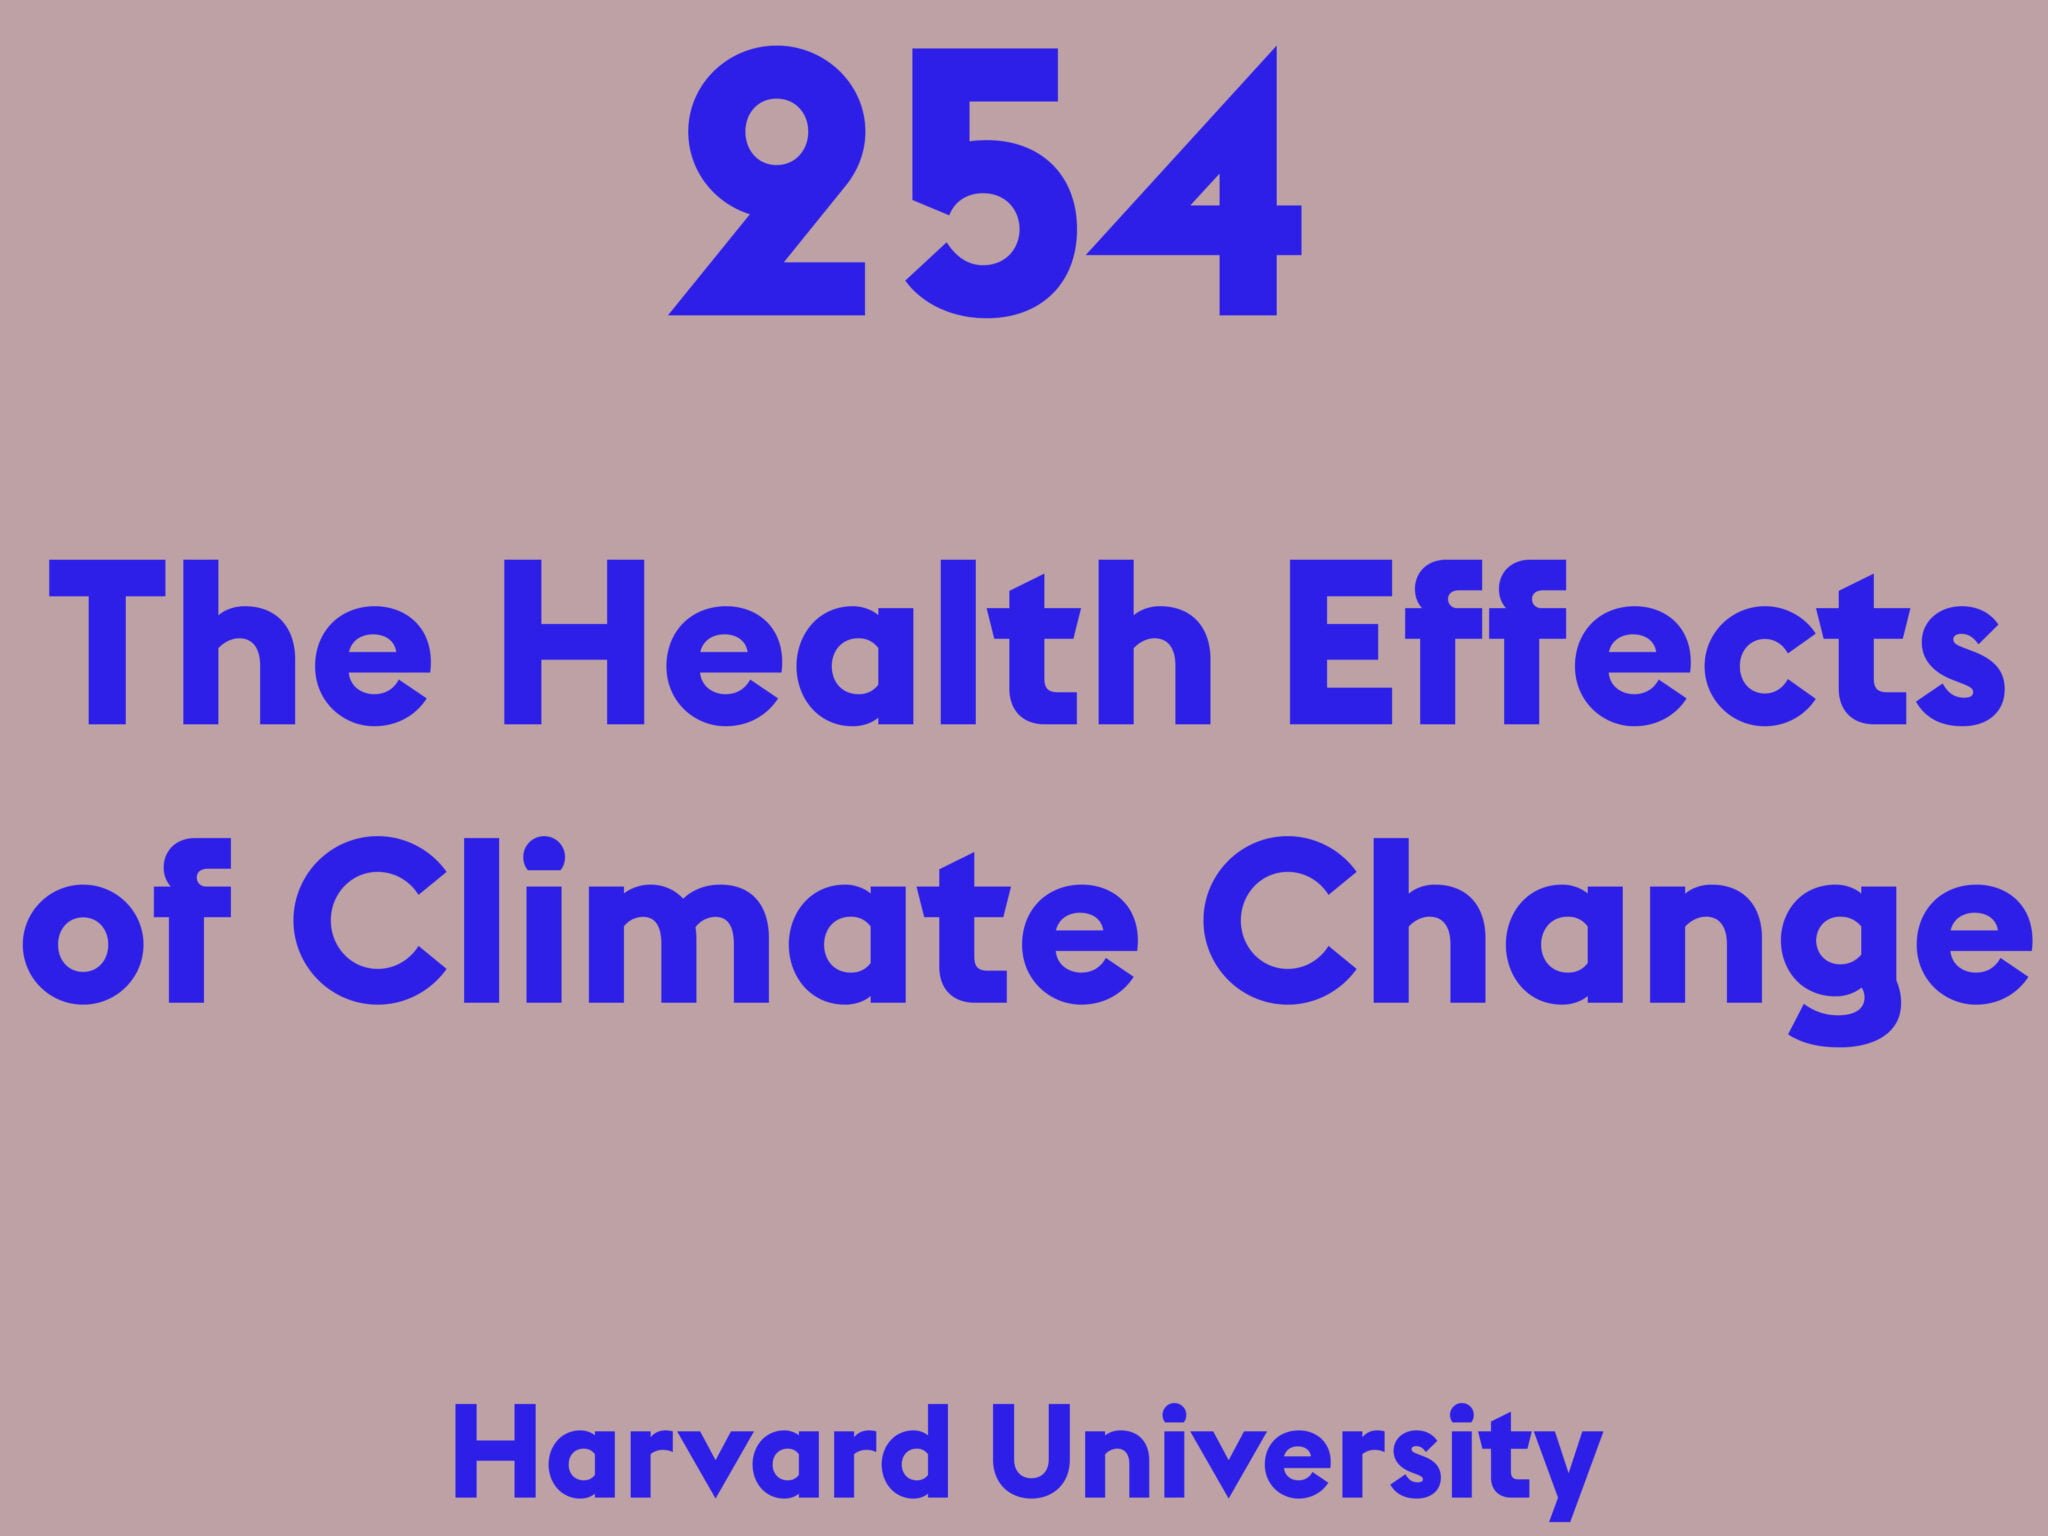 The Health Effects of Climate Change